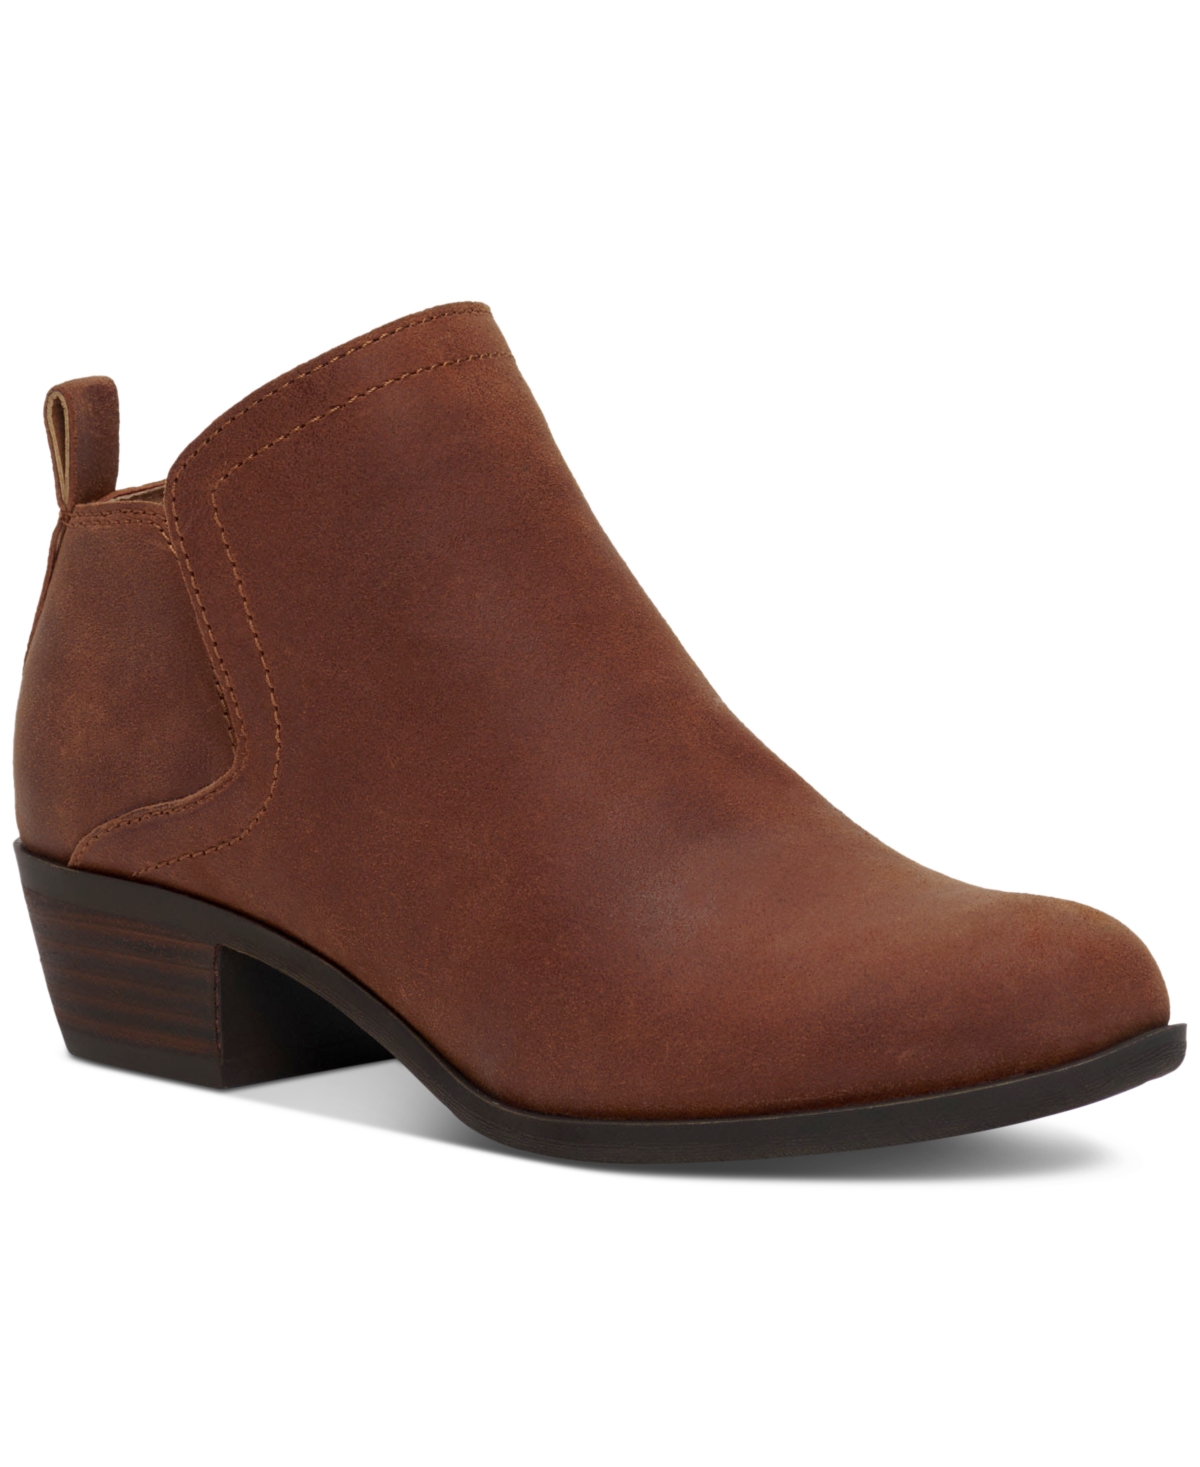 Women's Bollo Chop Out Booties - Ginger Leather